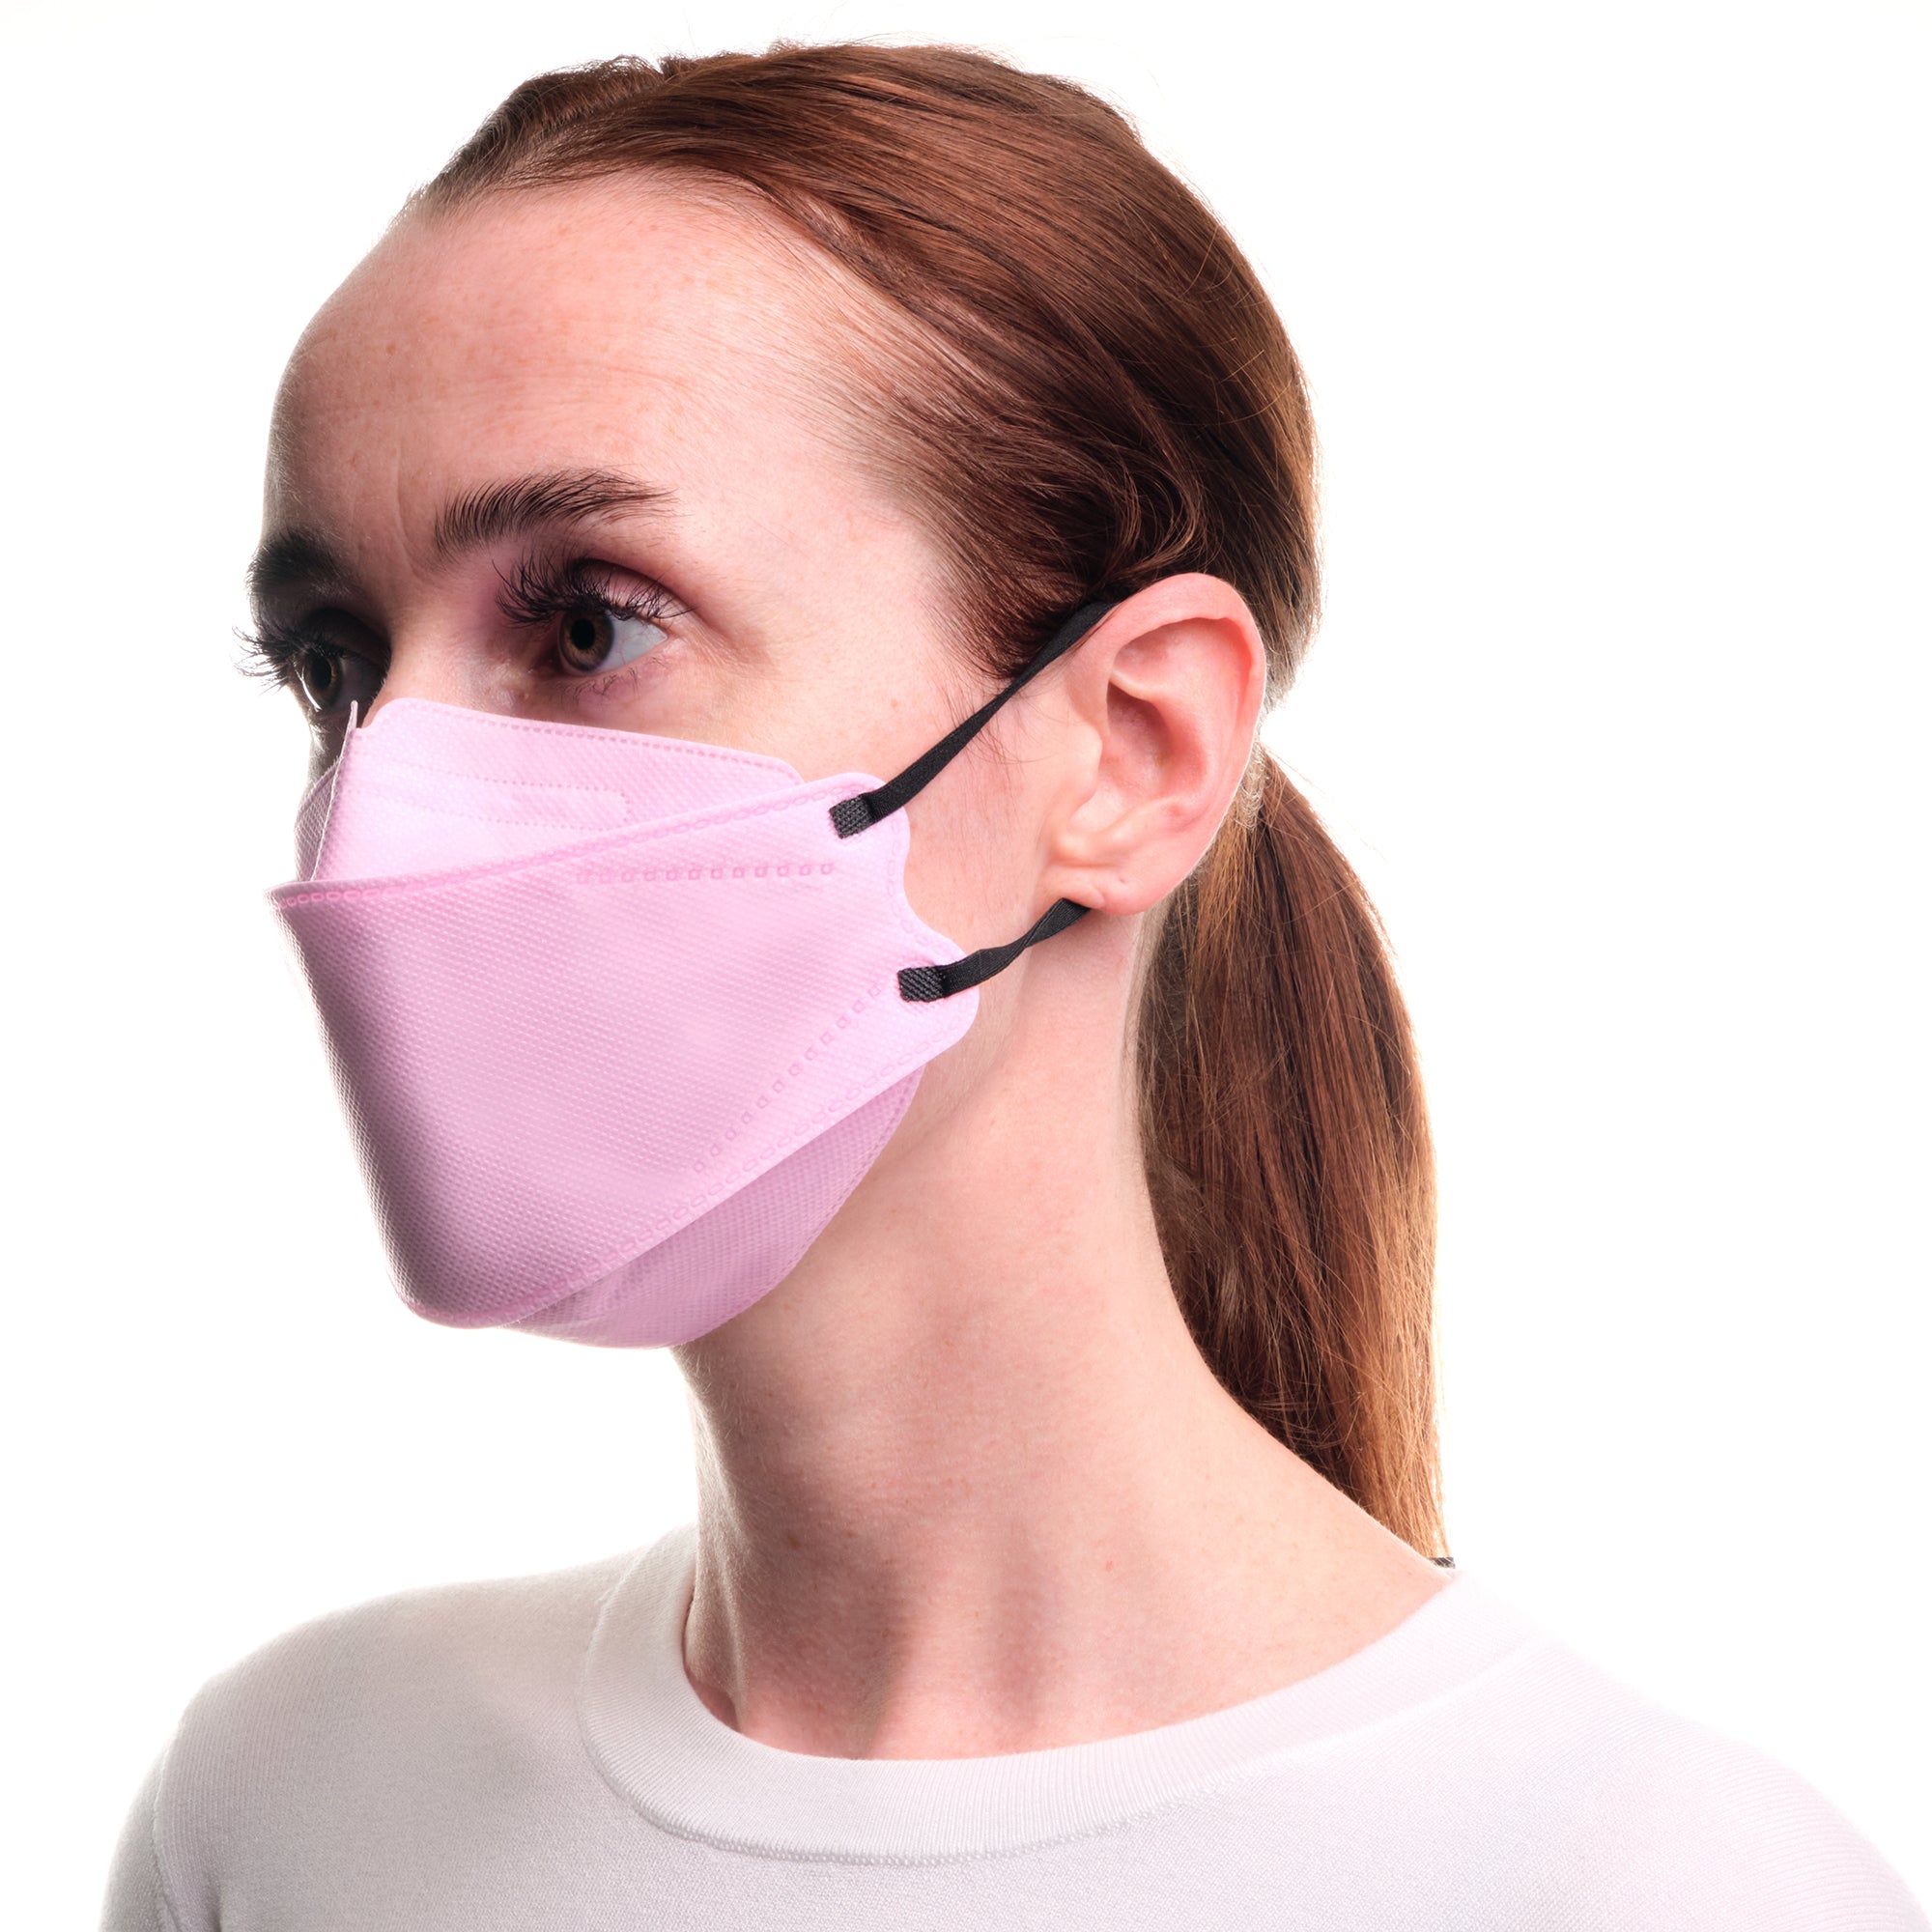 Kind KN95 Respirator Face Mask: The Pastel Collection